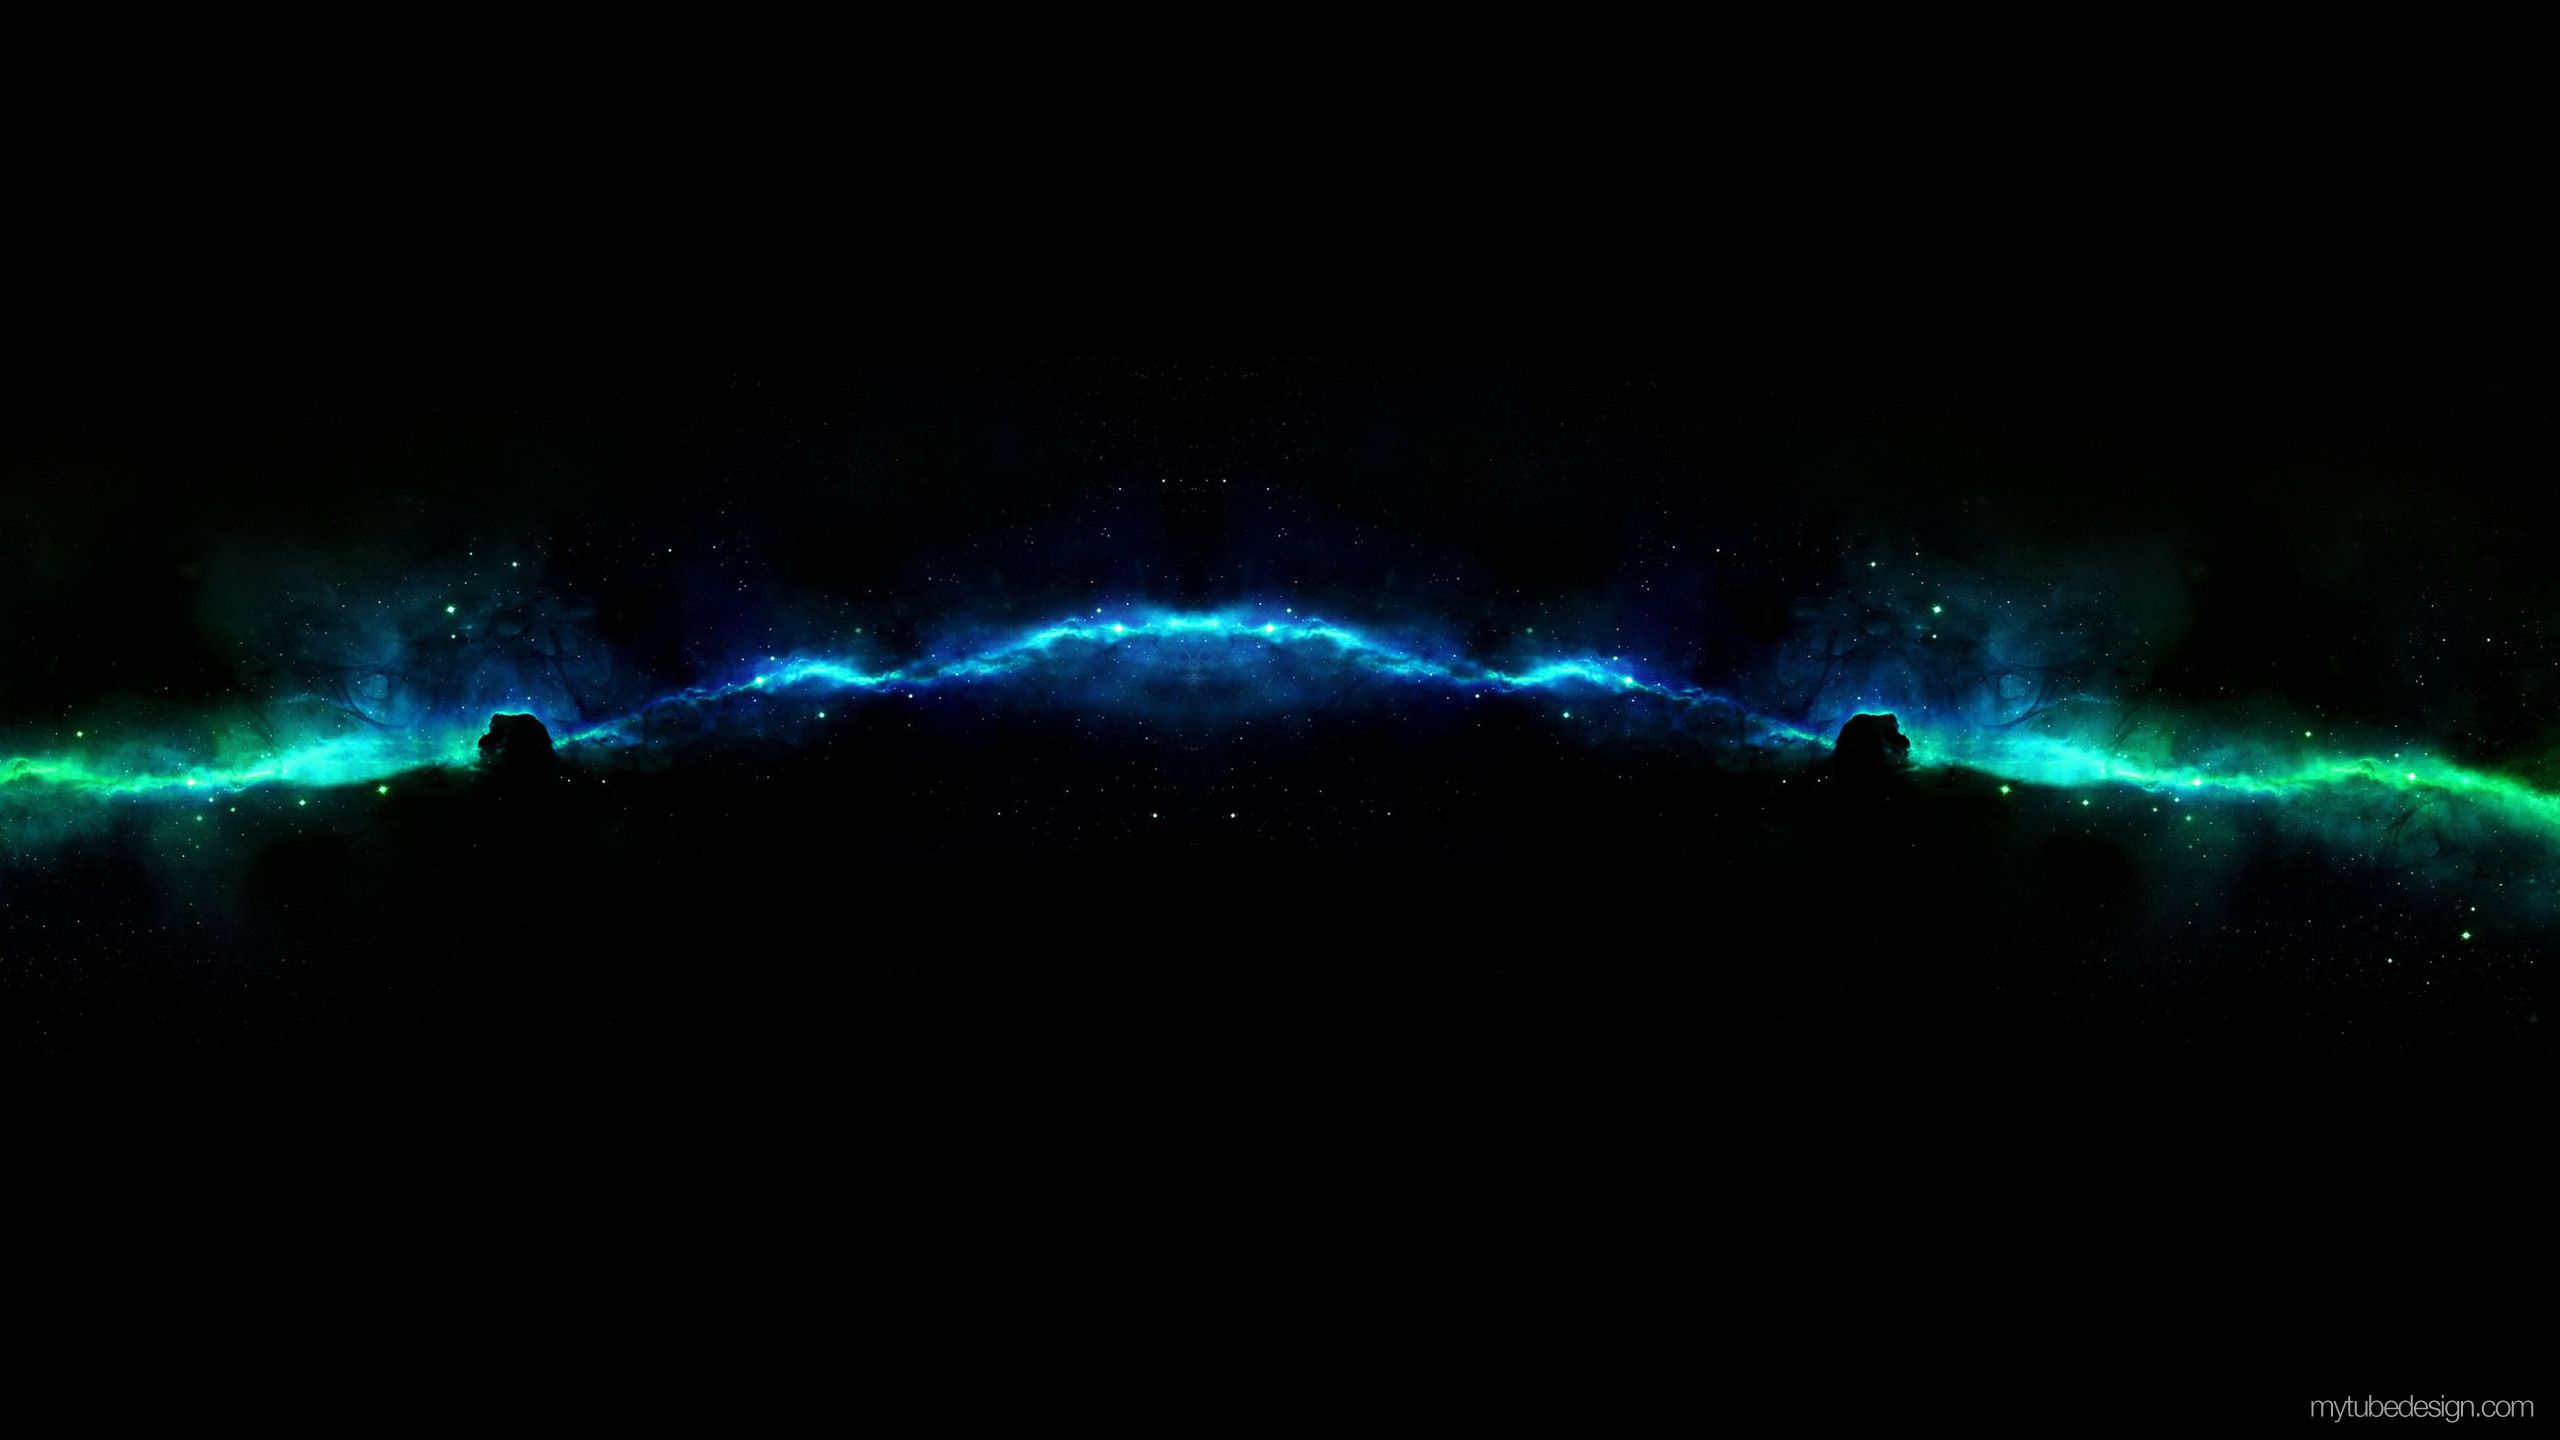 Black And Blue Youtube Channel Art - 2560x1440 Wallpaper 